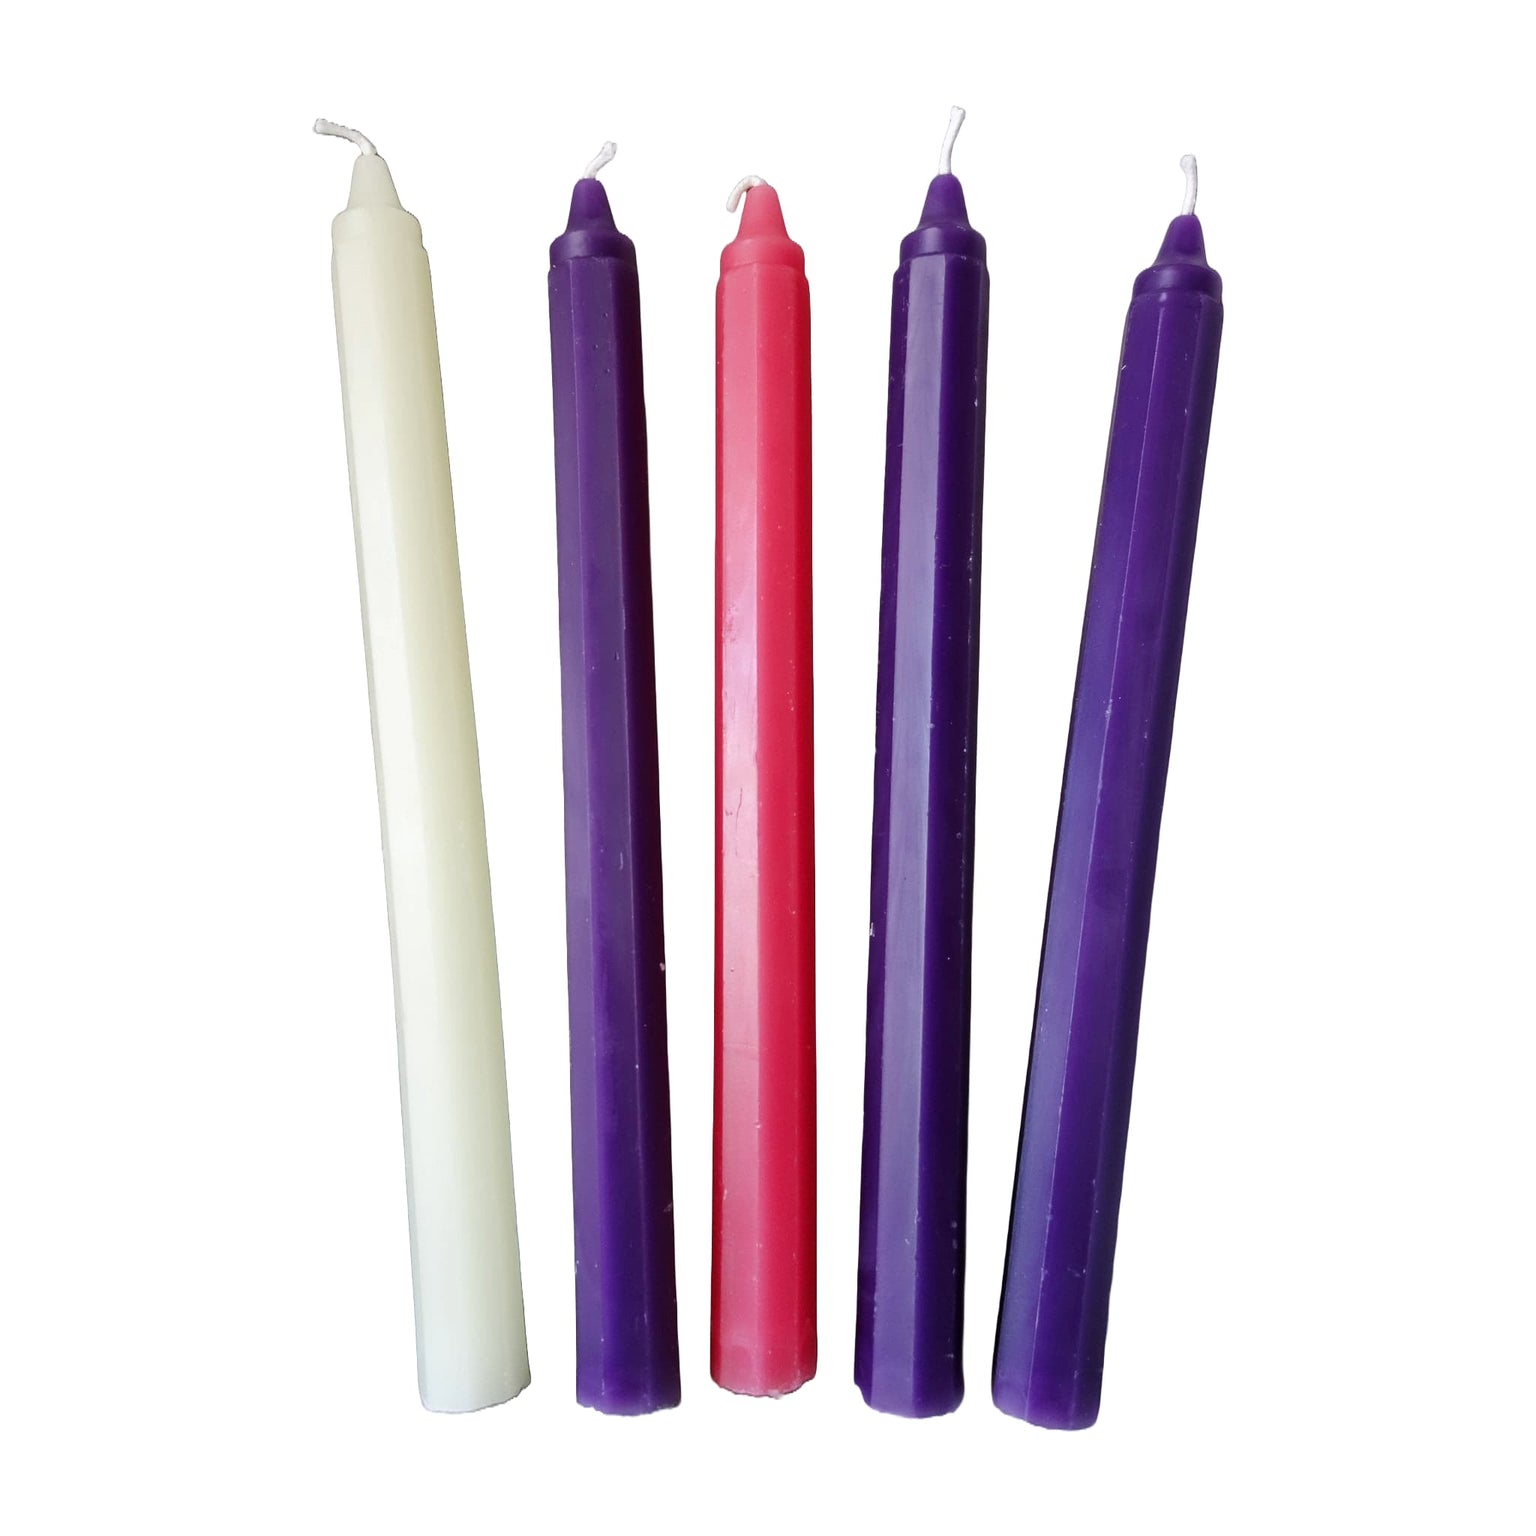 Octagonal Beeswax Advent Tapers, Set of Four 10 inch Candles